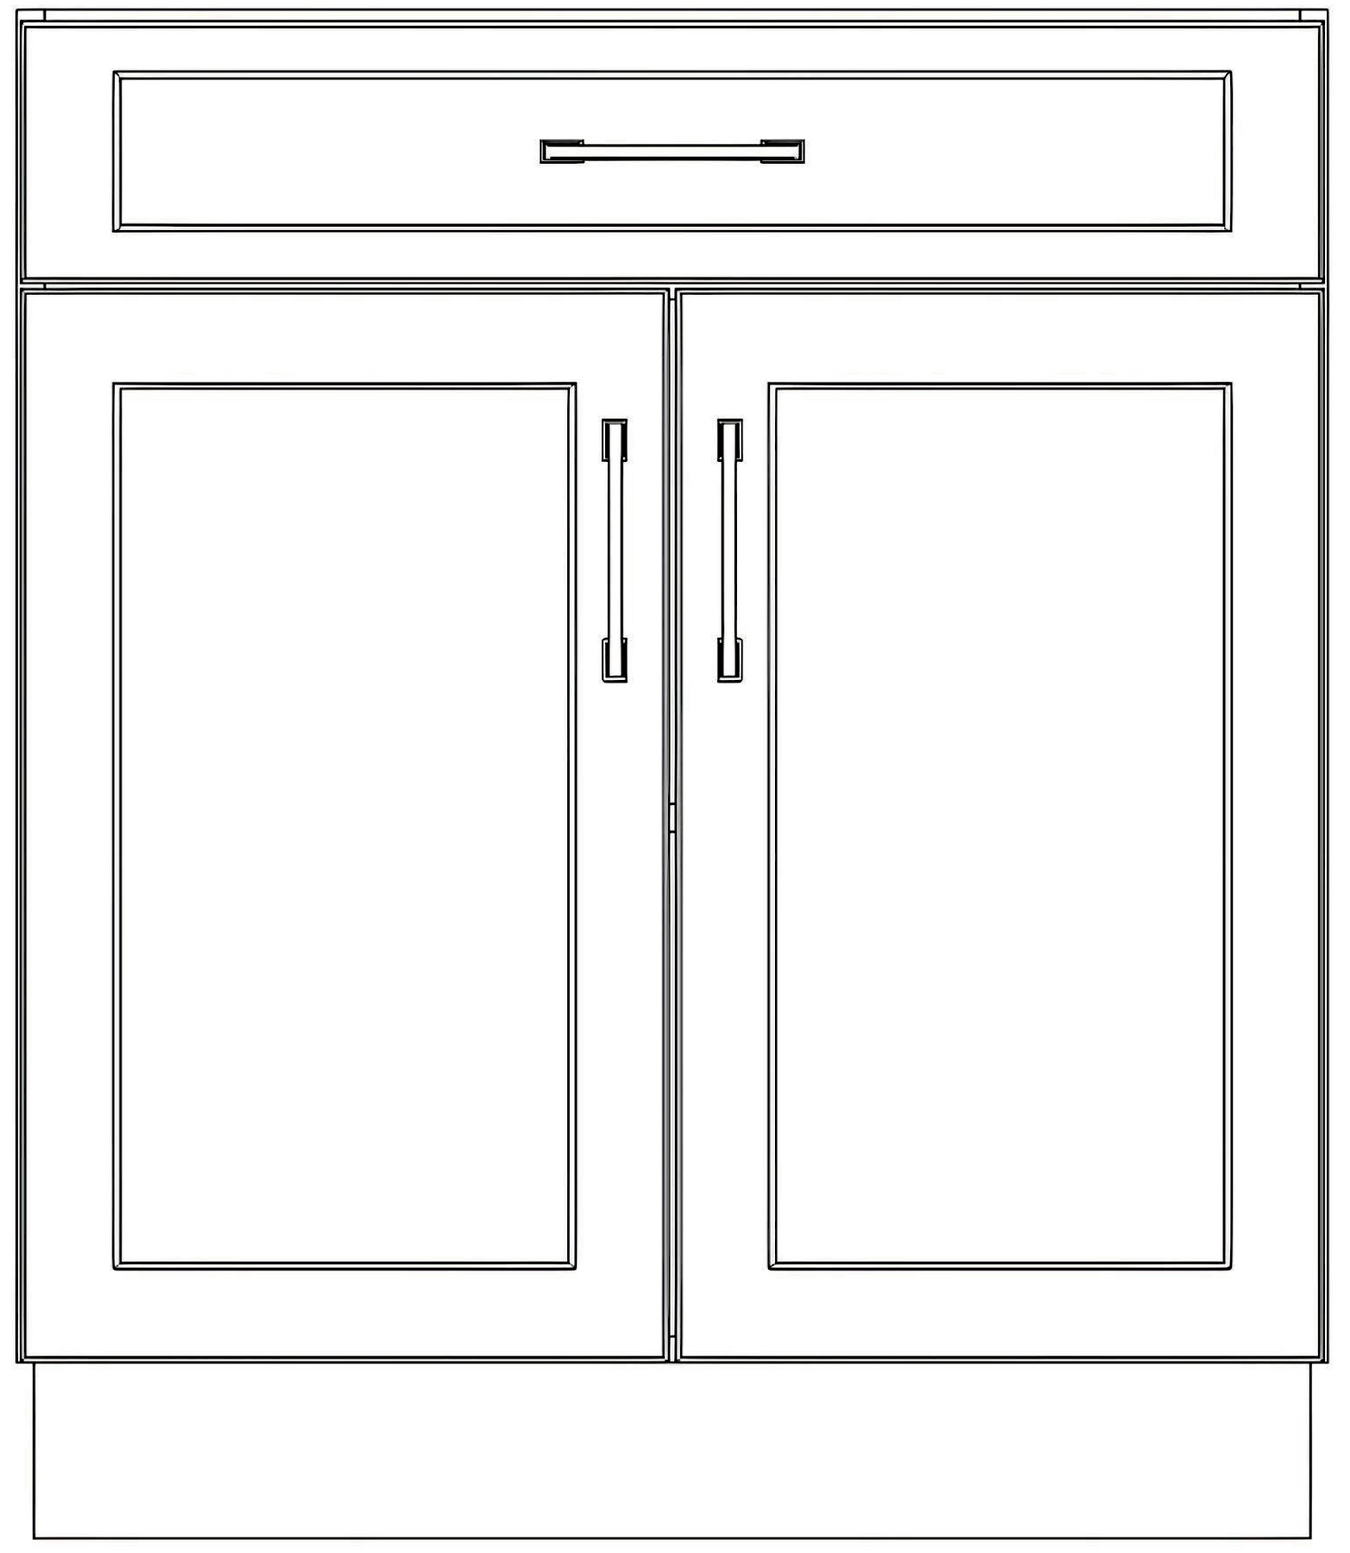 Base Cabinets With Drawer On Top - Painted Doors